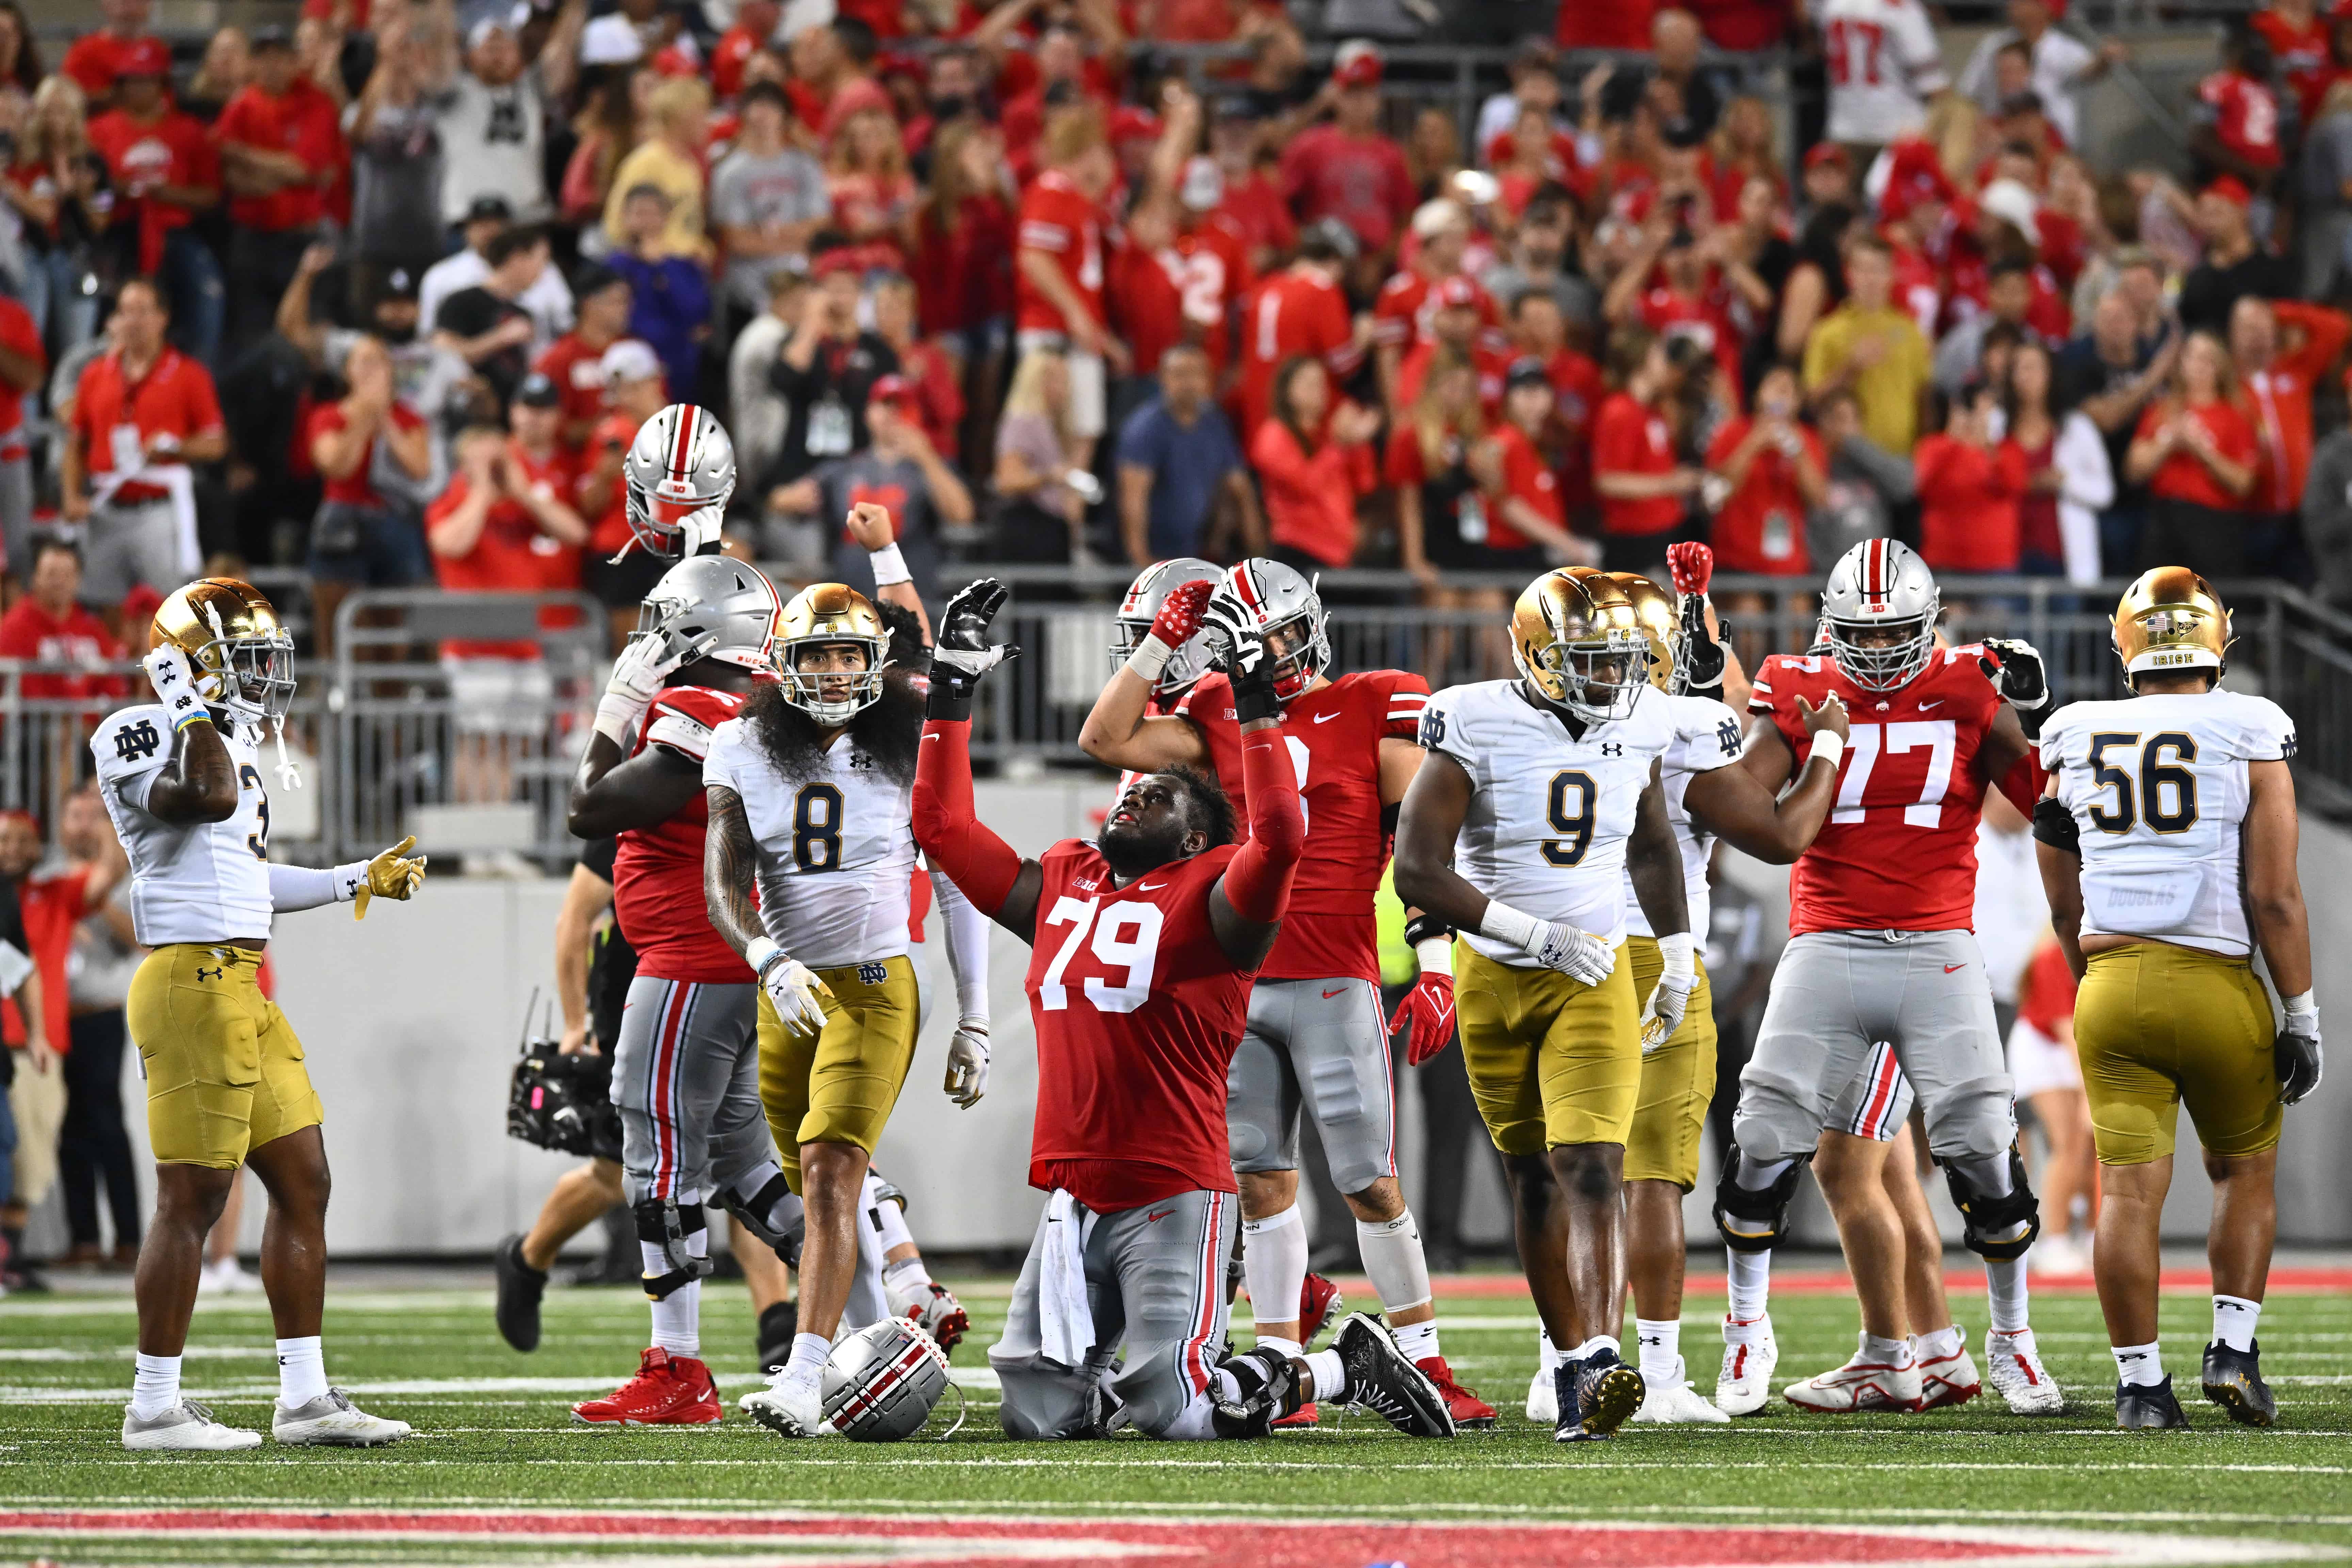 Dawand Jones #79 of the Ohio State Buckeyes falls to his knees in celebration after defeating the Notre Dame Fighting Irish 21-10 in a game at Ohio Stadium on September 03, 2022 in Columbus, Ohio.